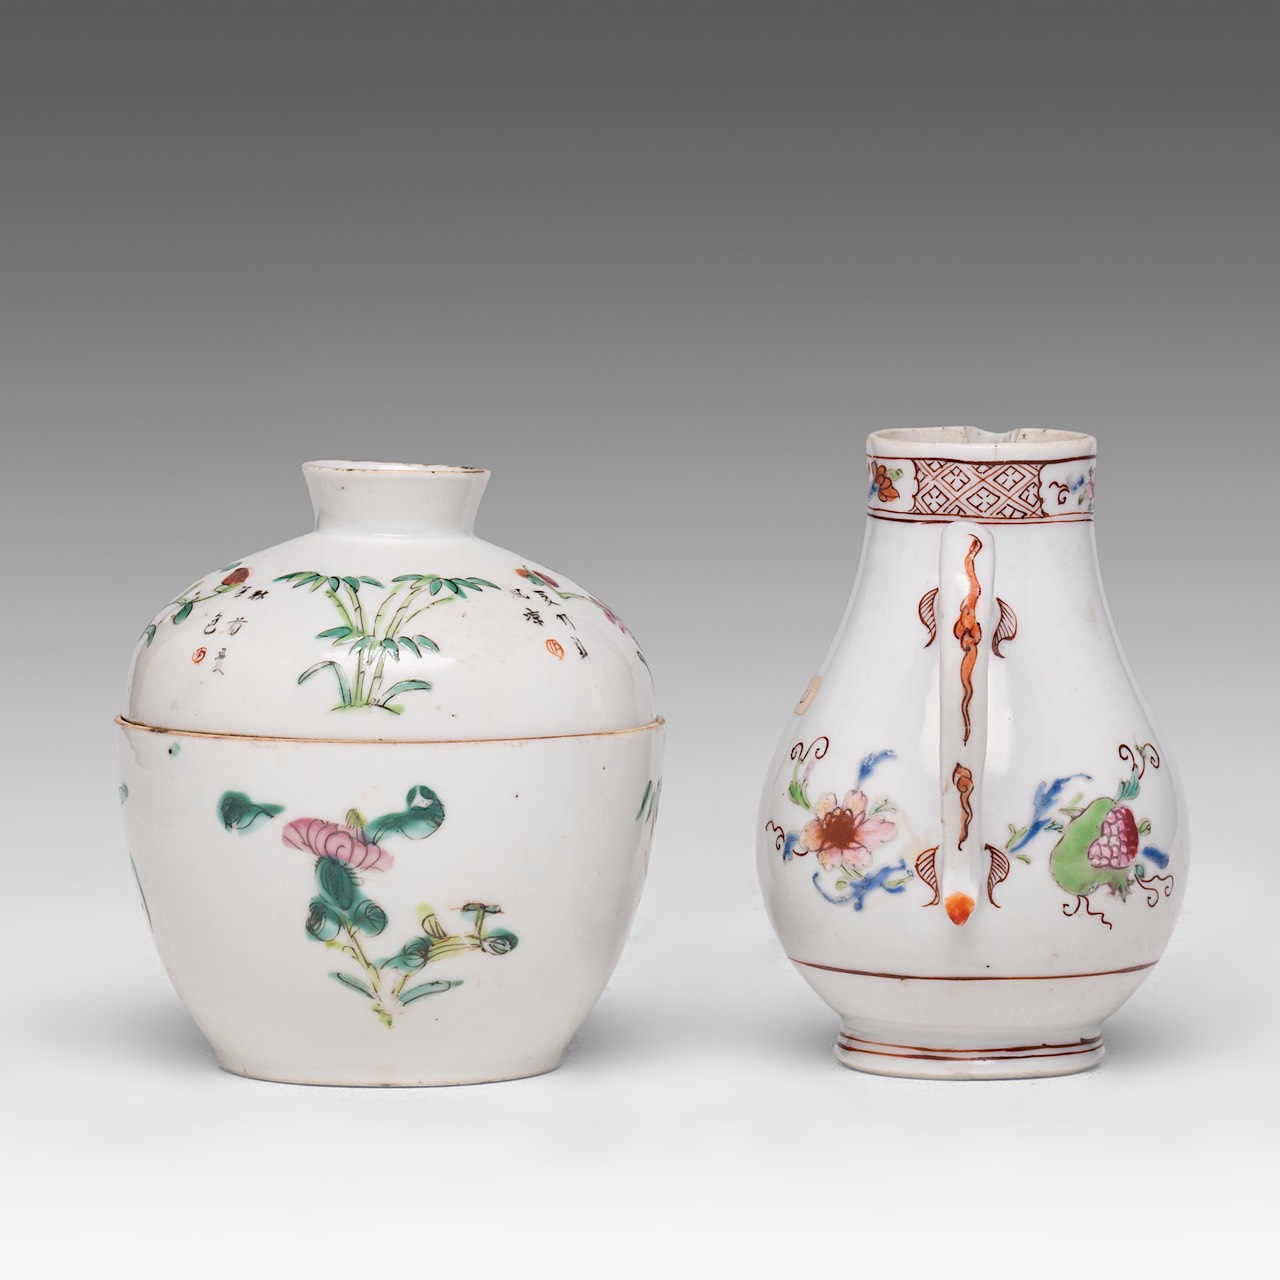 A collection of four Chinese scholar's objects, incl. a brush pot with inscriptions, late 18thC - ad - Image 8 of 29